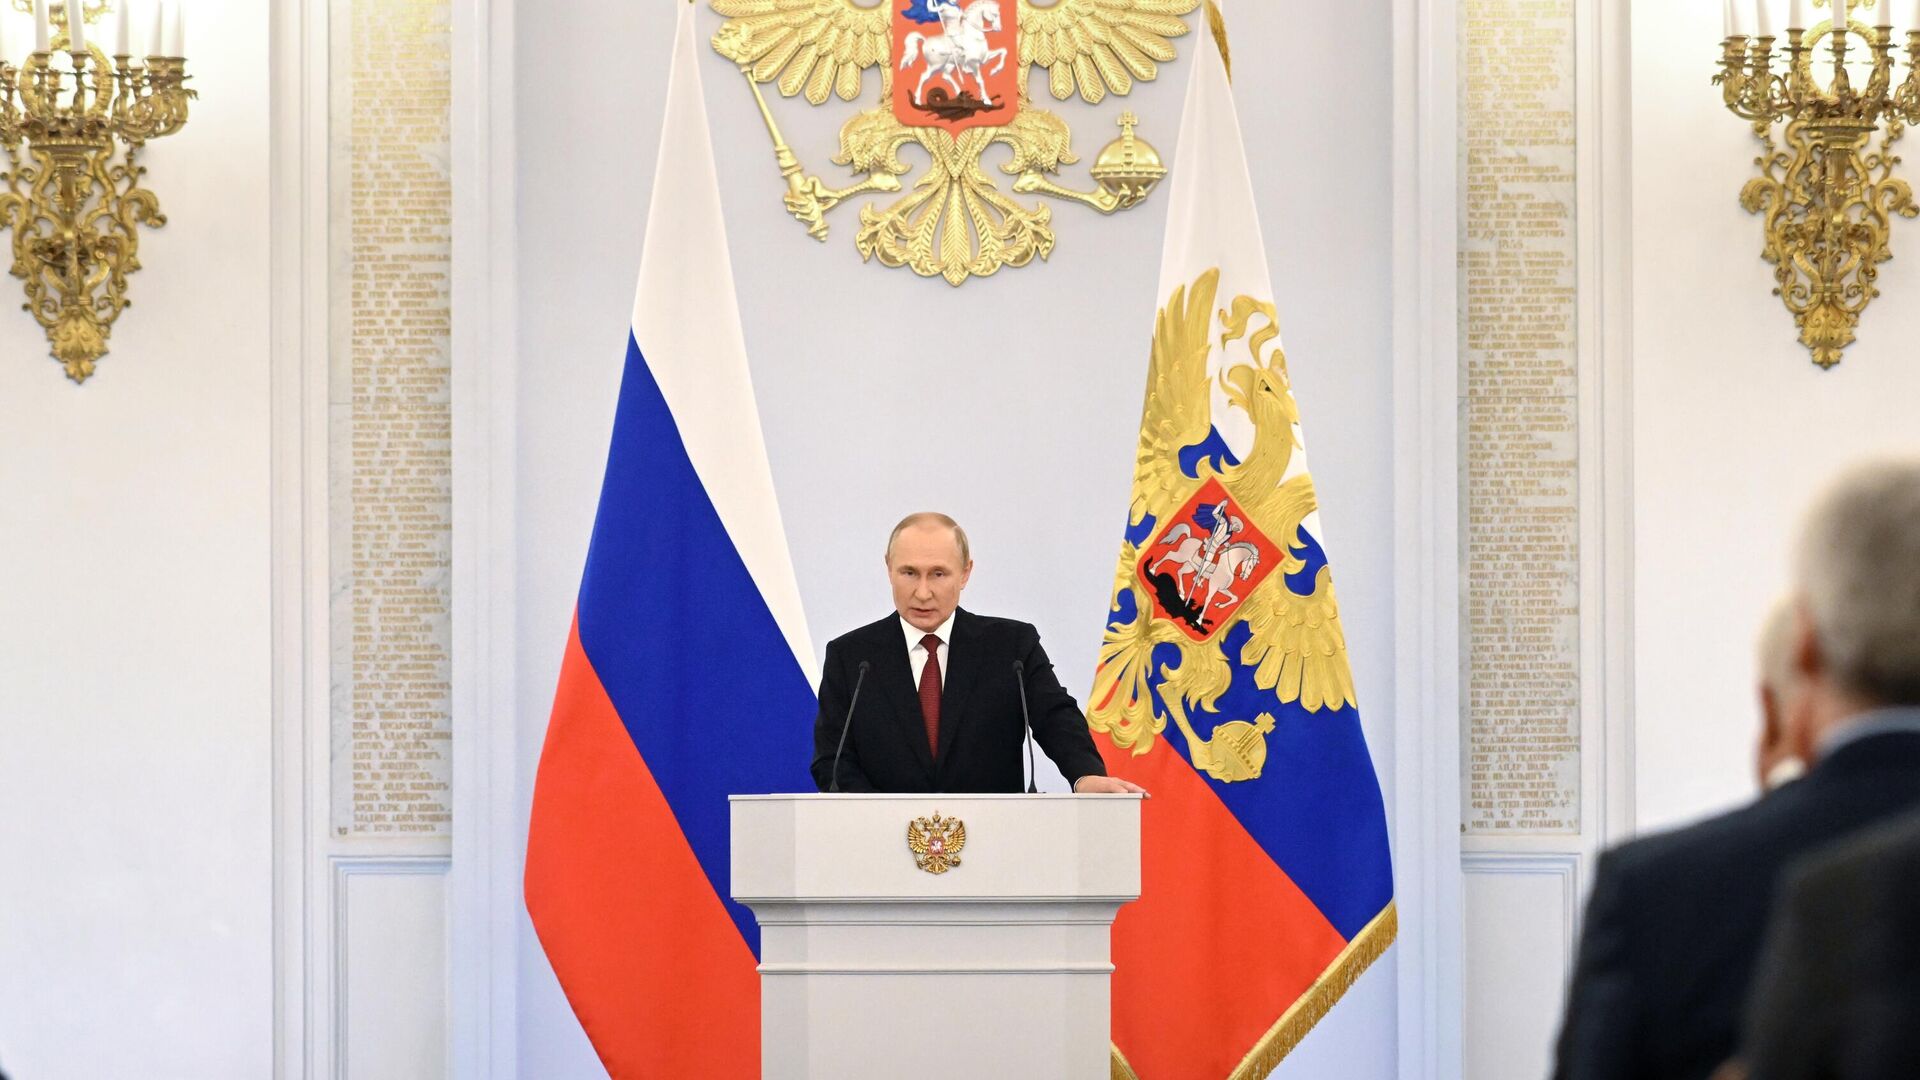 Putin Speaks at Ceremony on Accession of New Territories Into Russian Federation - Sputnik International, 1920, 30.09.2022